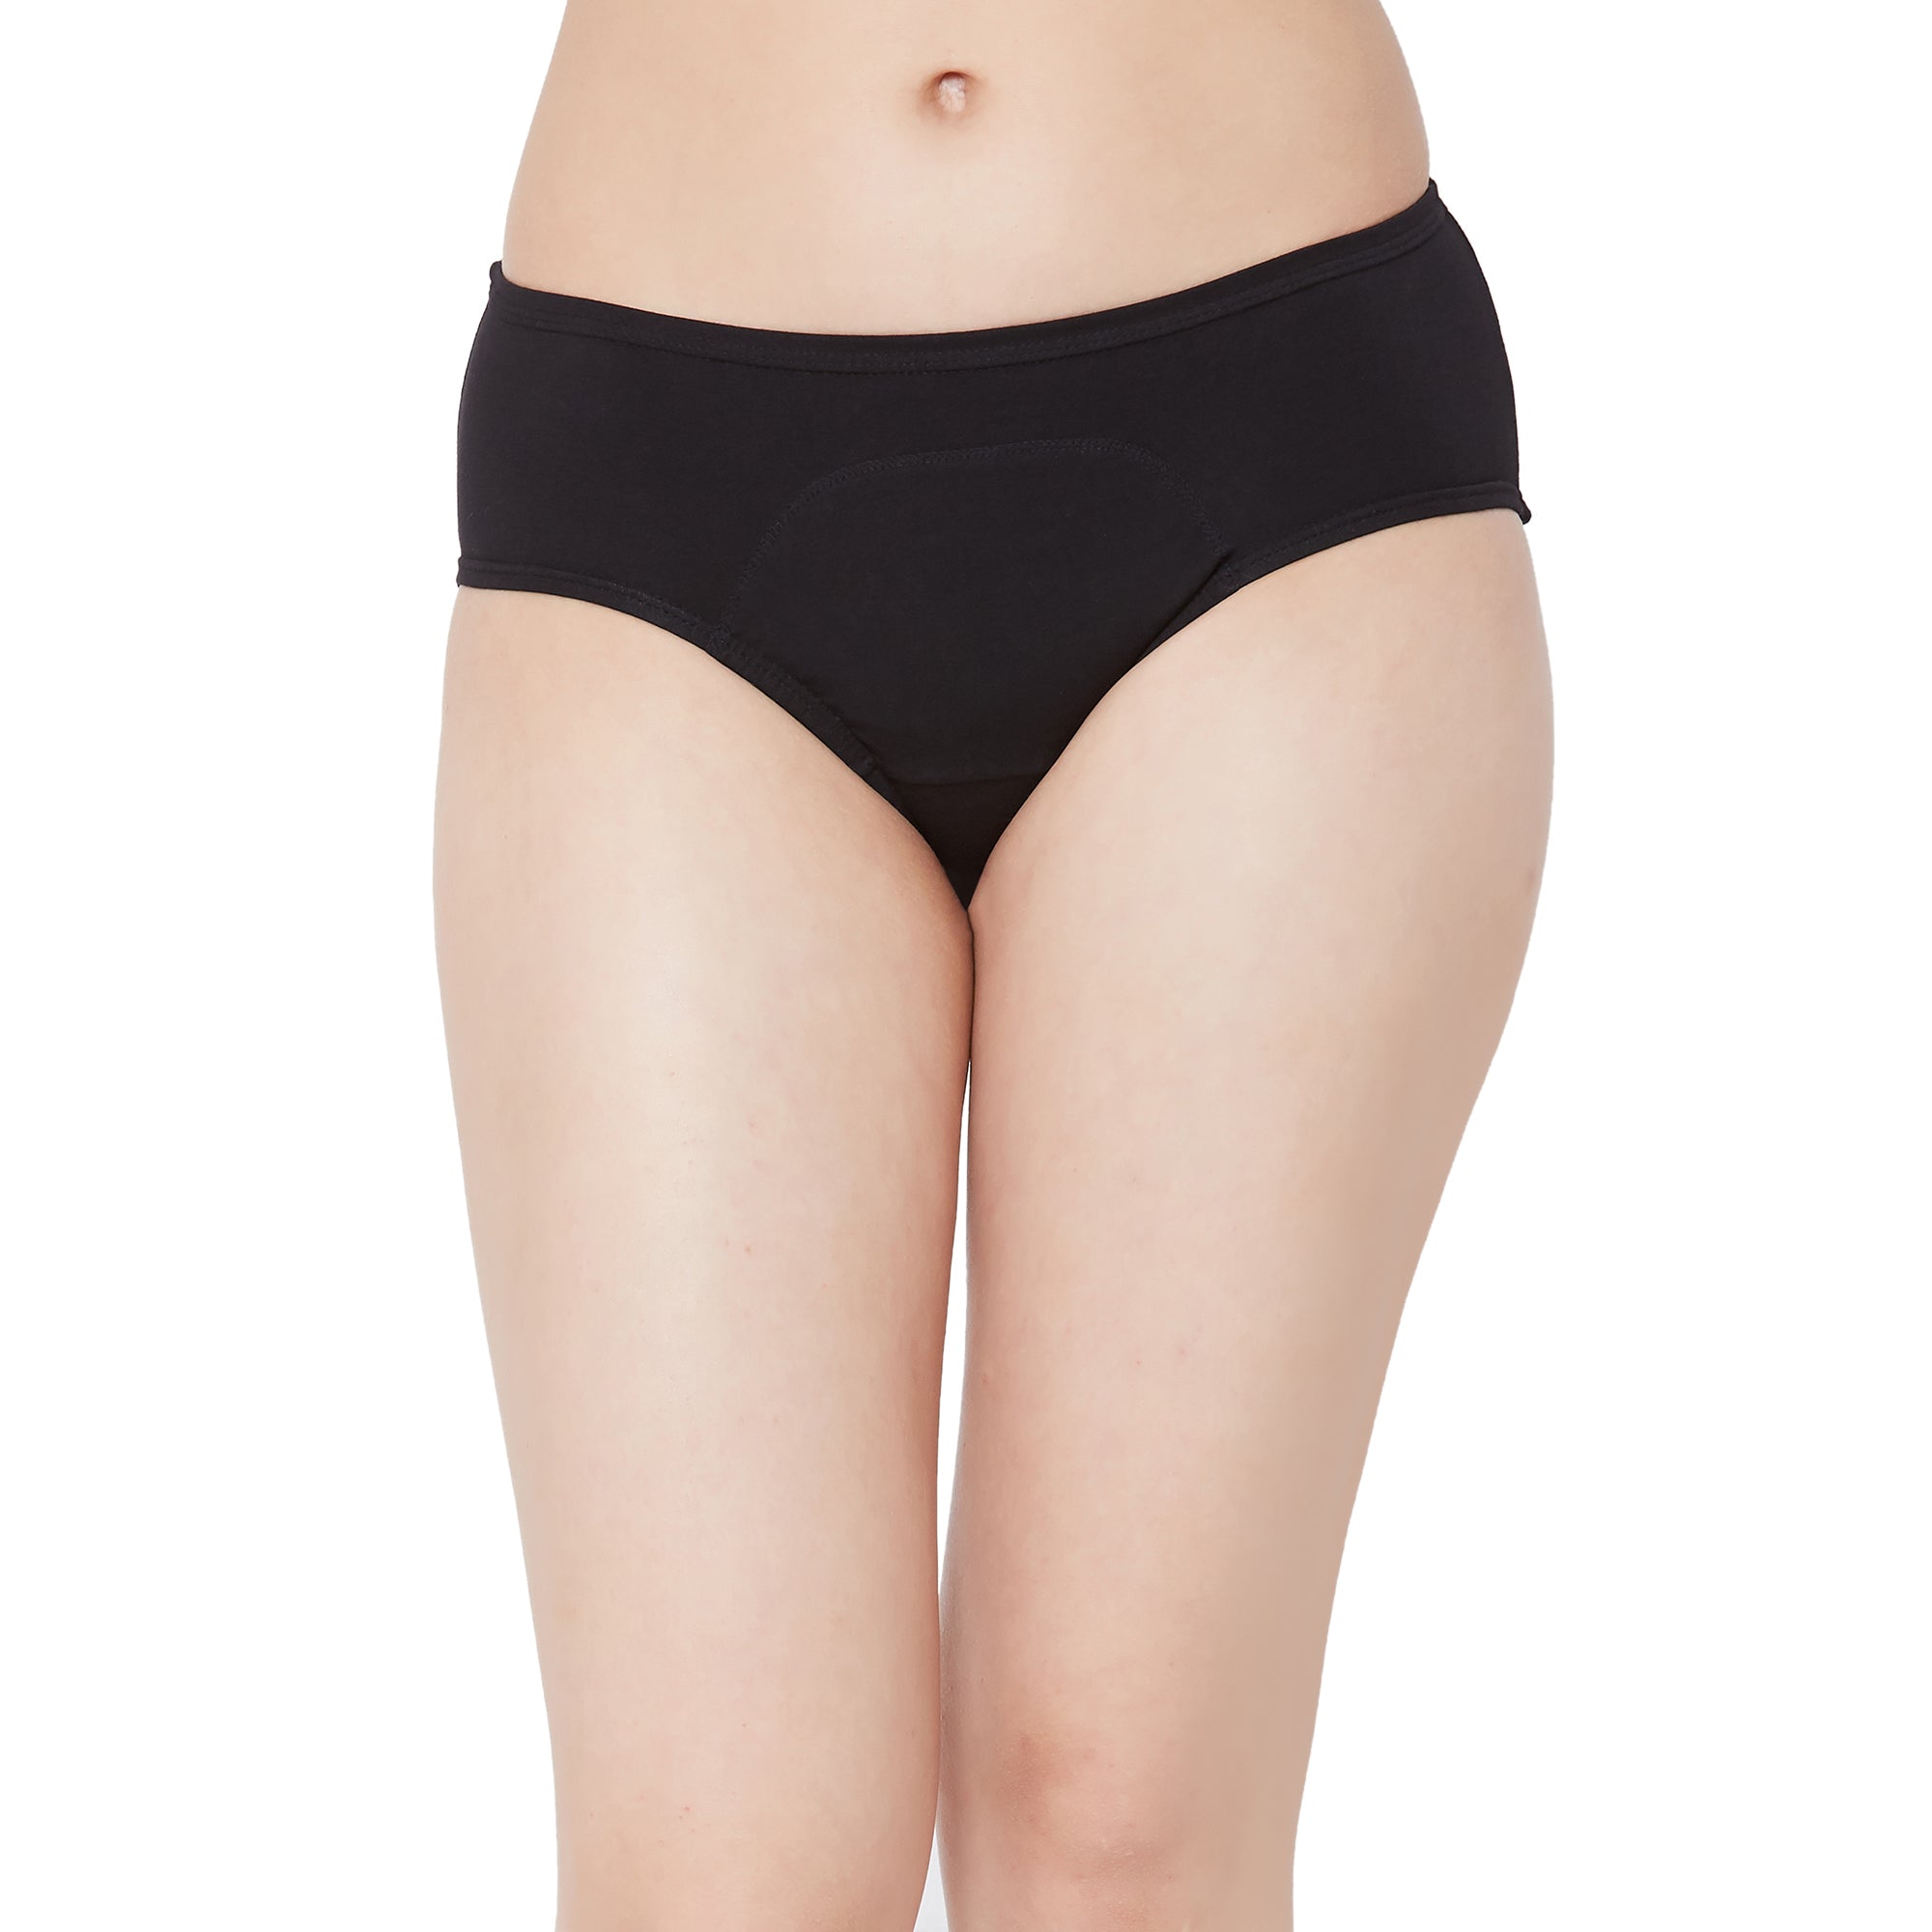 Period Panty Mid Rise No Stain Period Panty Black